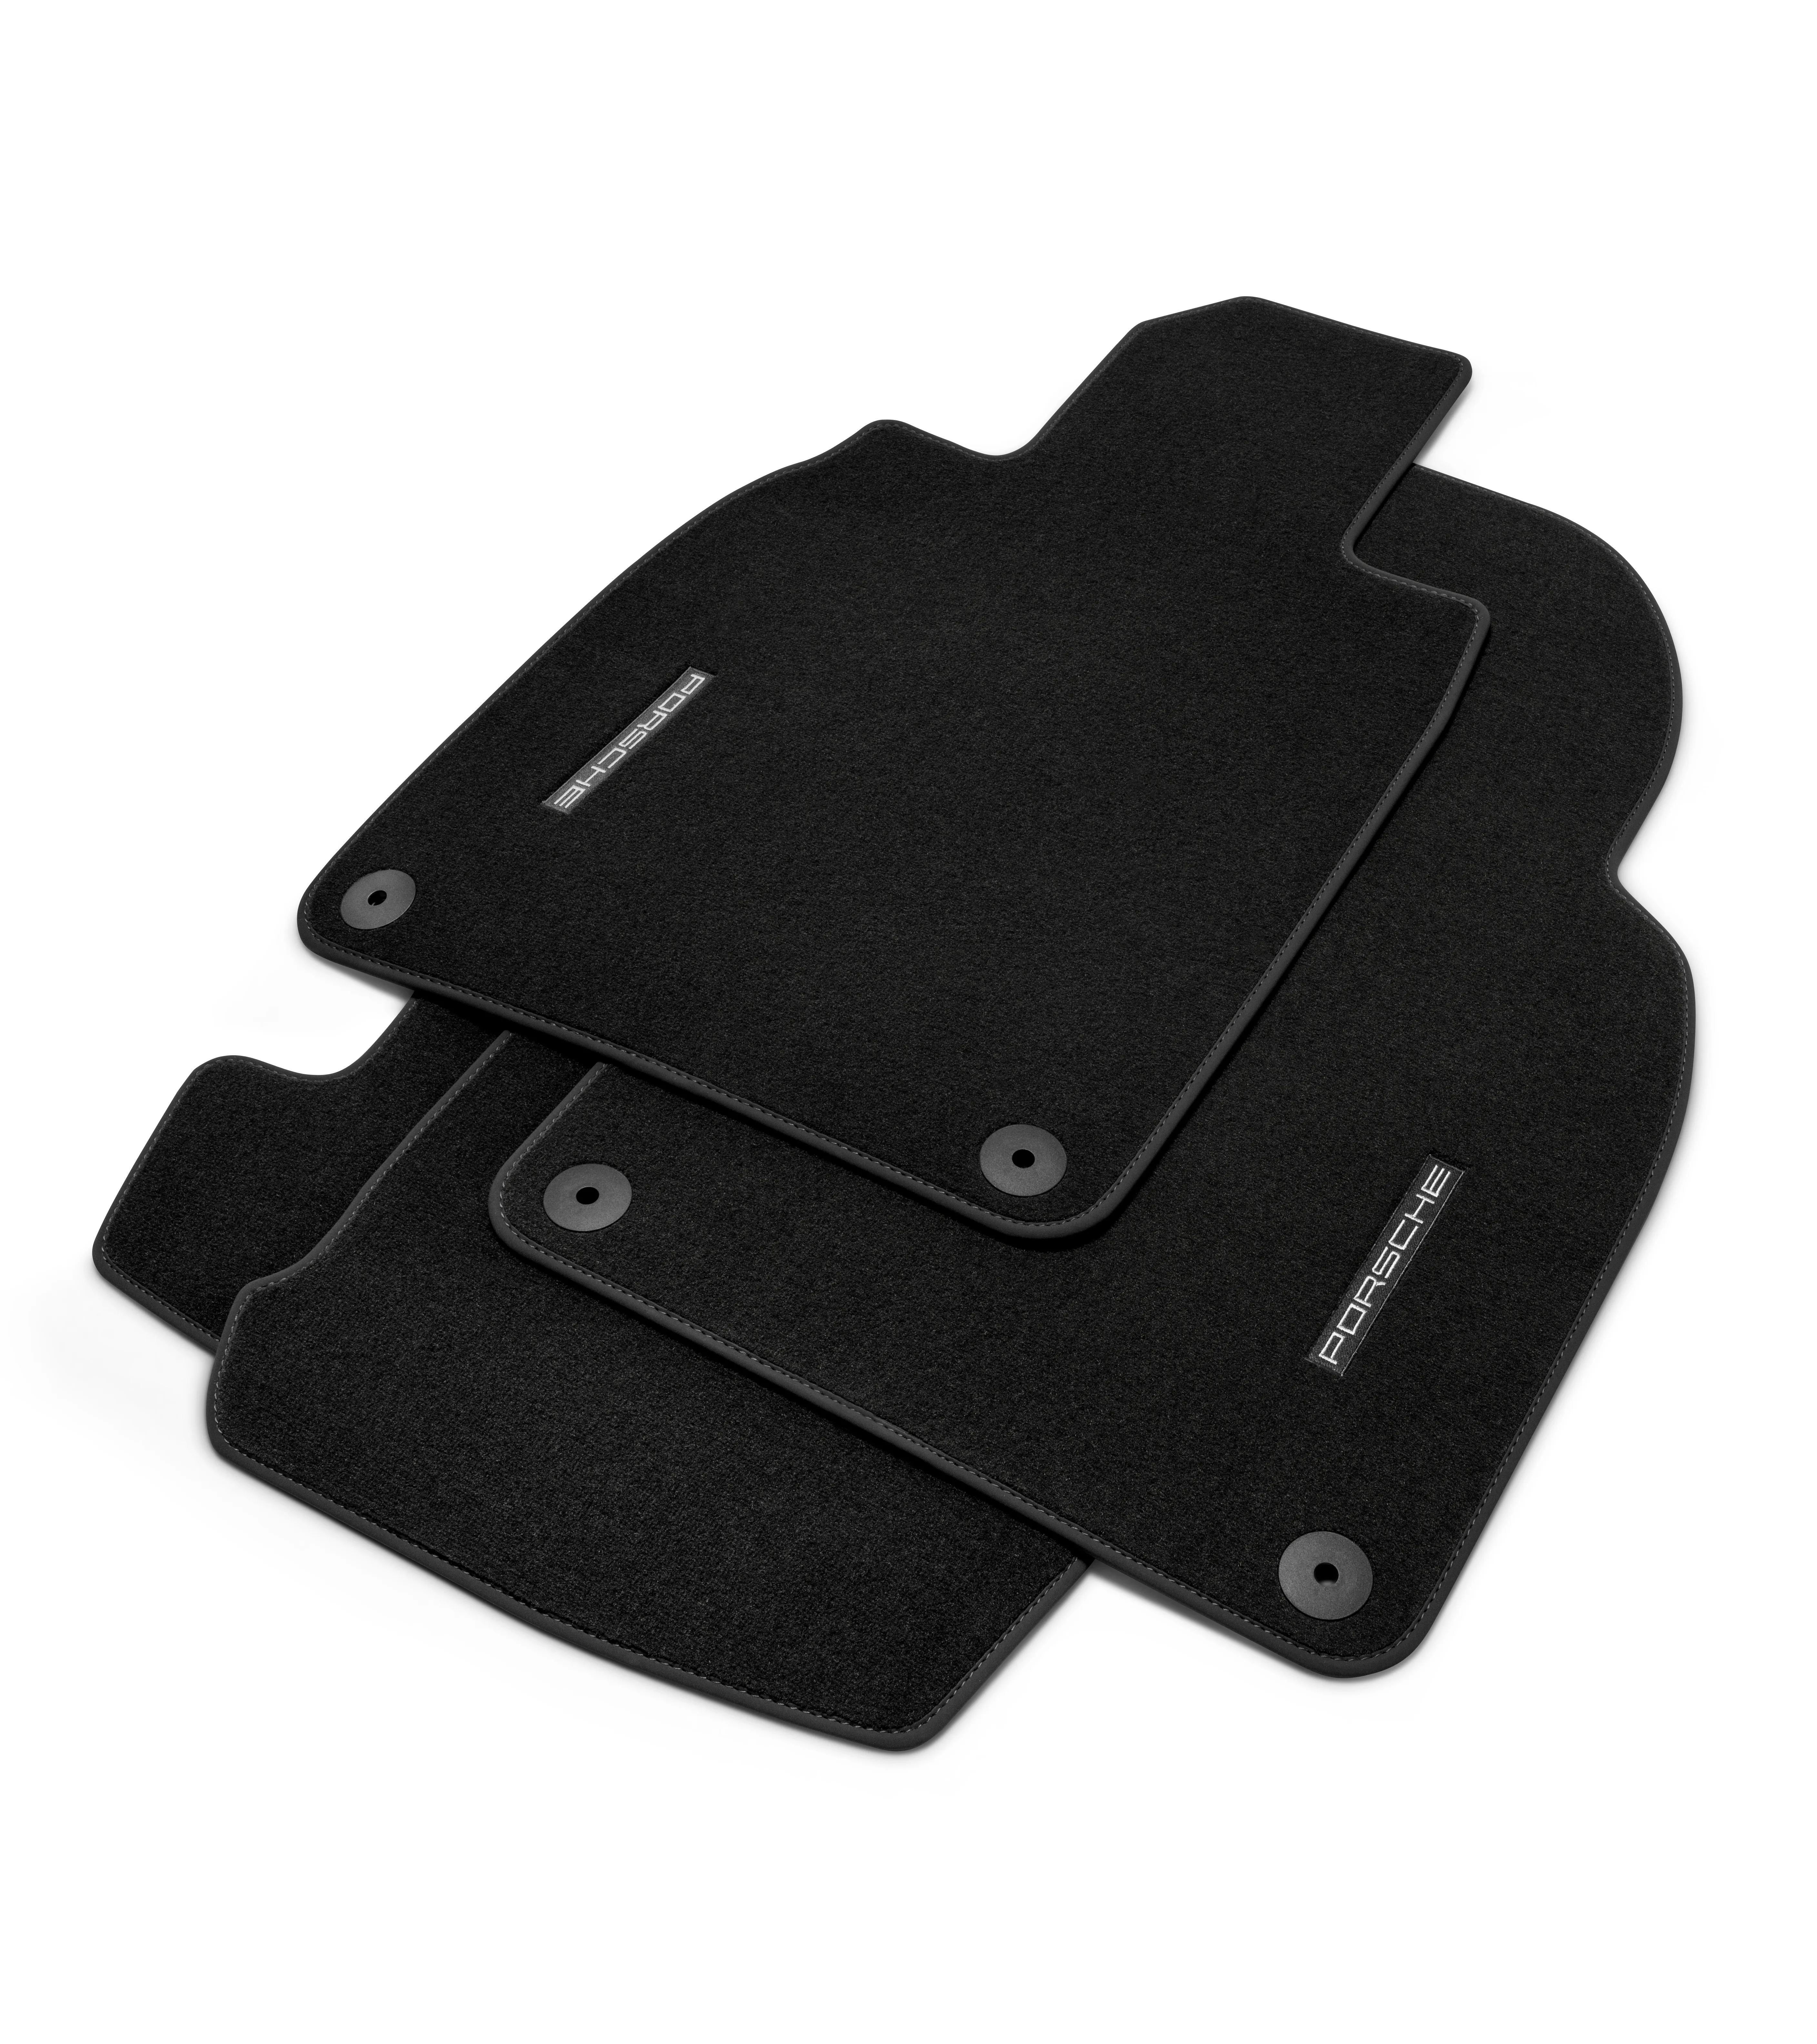 Carpeted Floor Mats with Nubuck Edging for 718 (982), Boxster